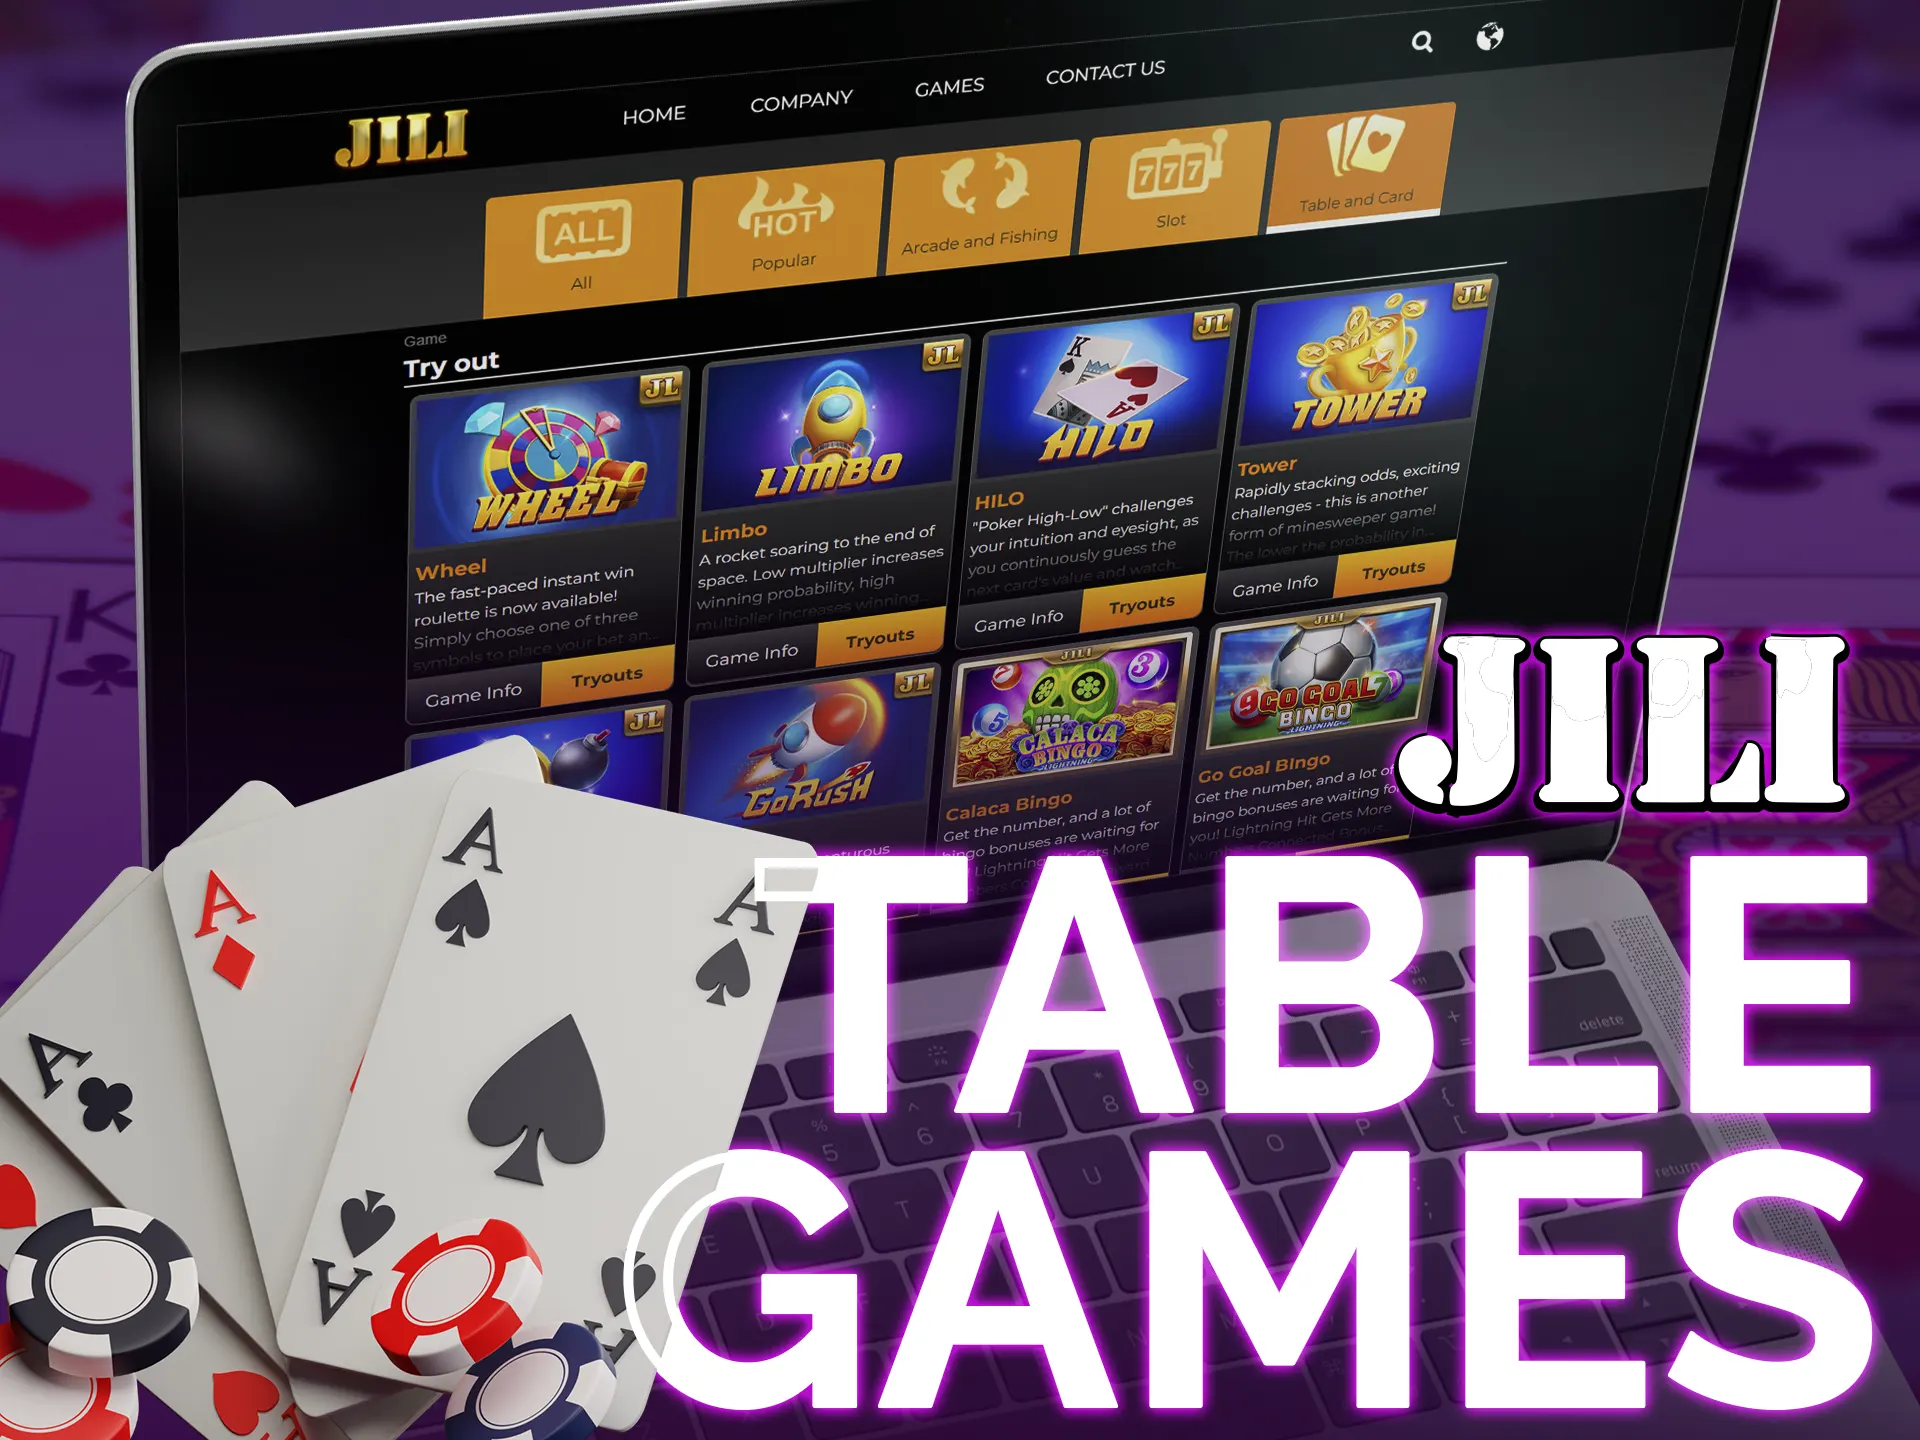 Jili Games have a table games, including Teen Patti, Rummy, Poker.